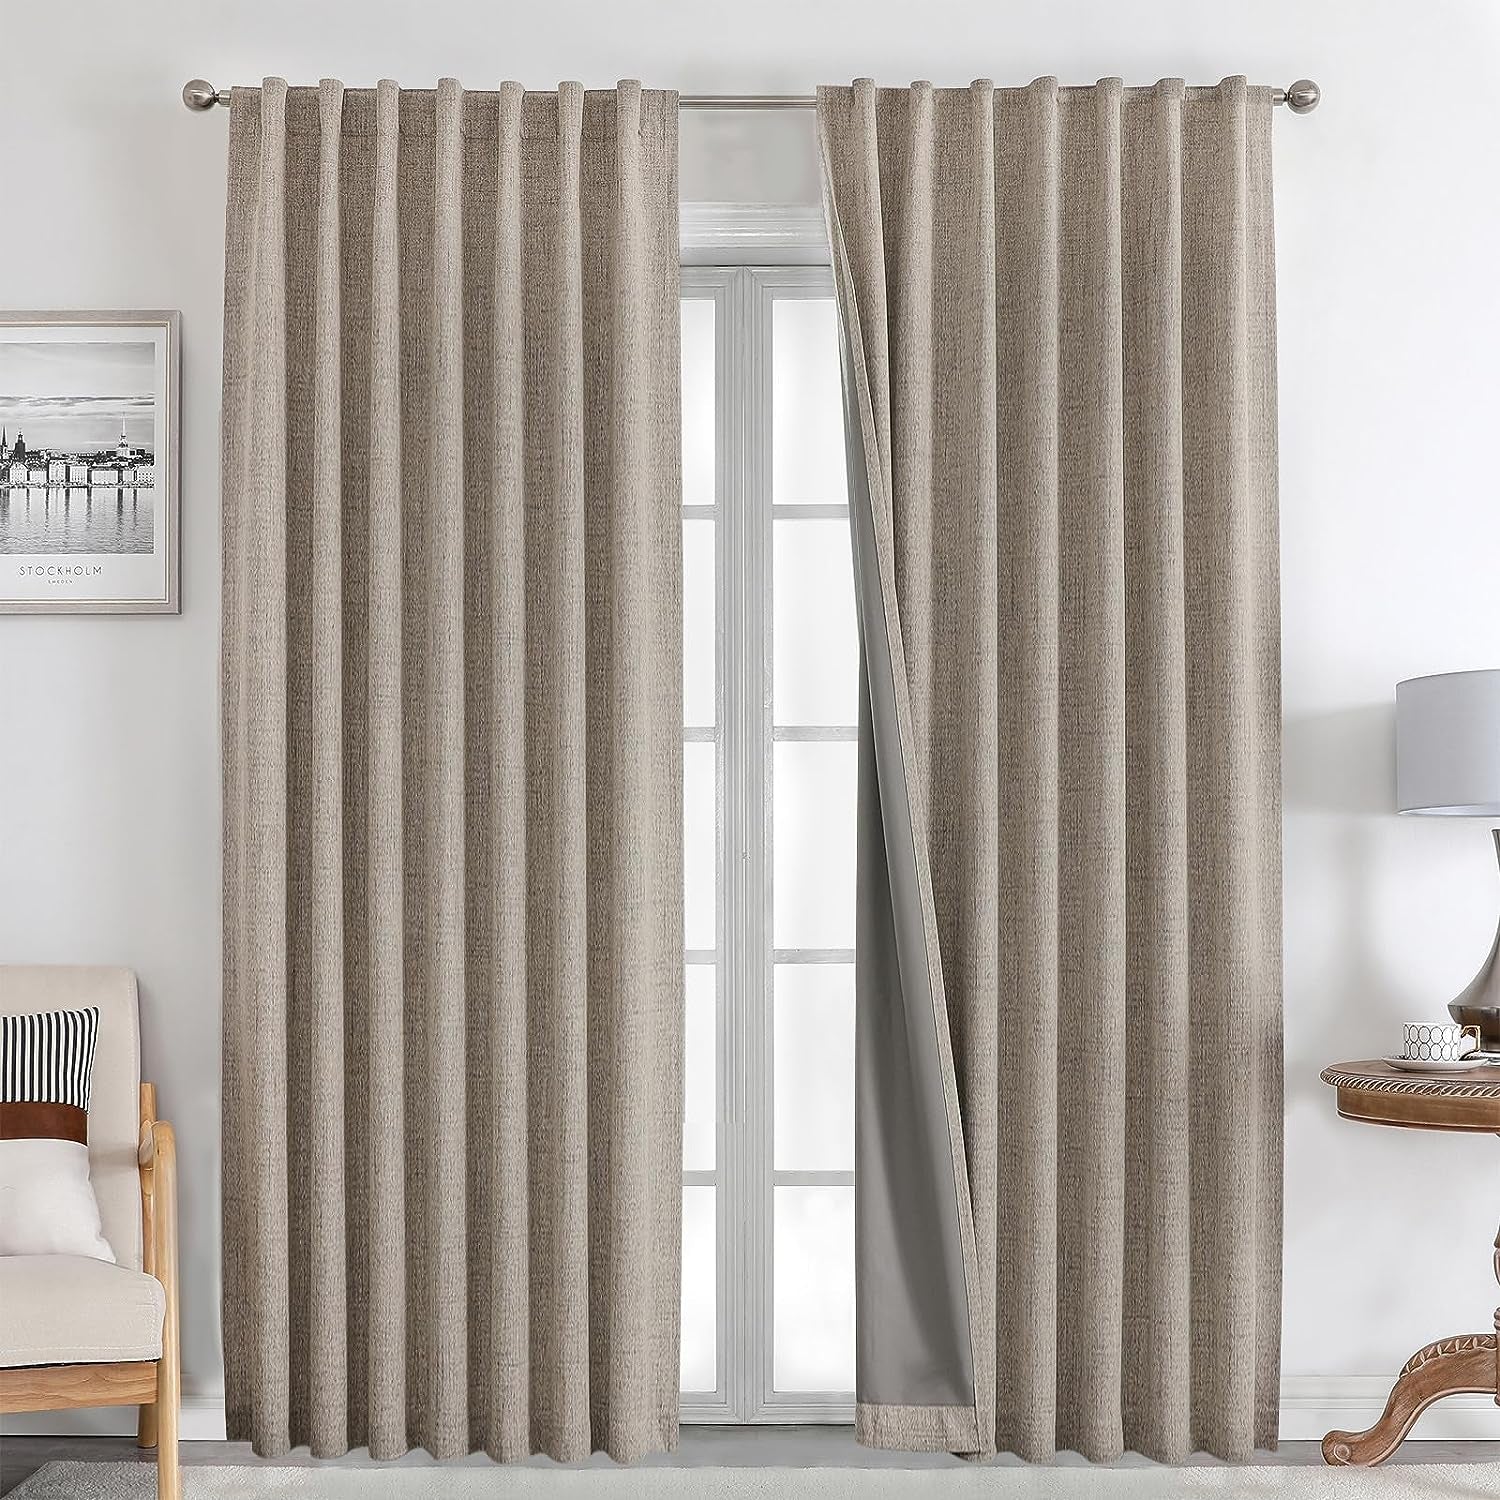 Joydeco 100% Black Out Curtains 96 Inch Long 1 Panels Burg Natural Blackout Linen Drapes for Bedroom Living Room Darkening Curtain Thermal Insulated Back Tab Rod Pocket(70X96 Inch,Black)  Joydeco Linen 52W X 90L Inch X 2 Panels 